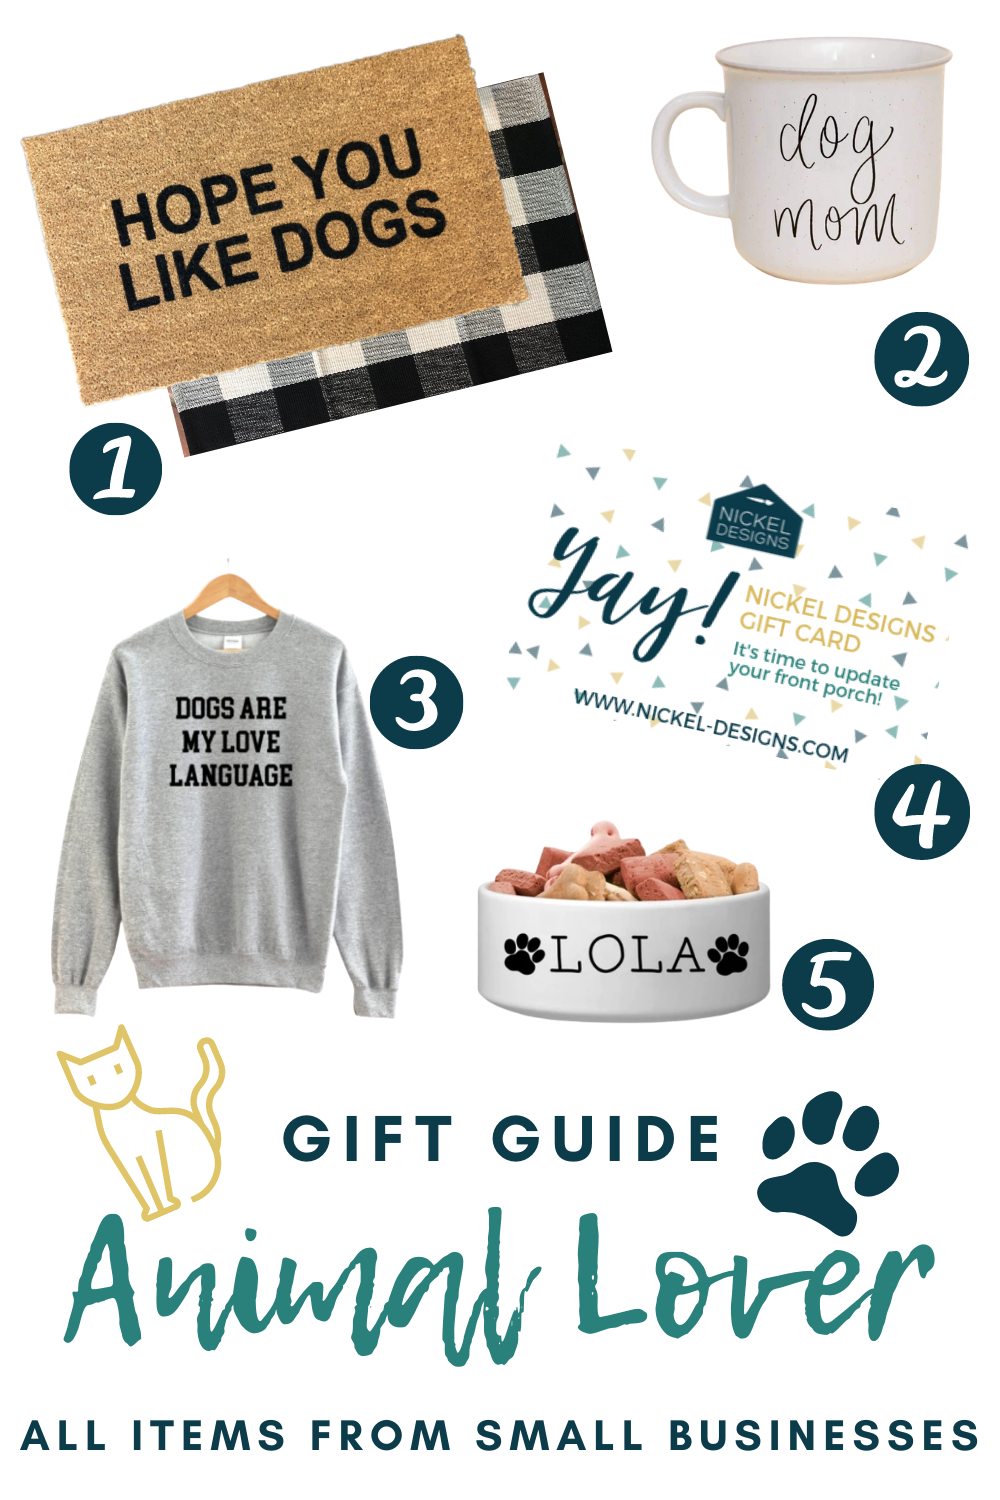 2020 SHOP SMALL GIFT GUIDES - Animal Lovers